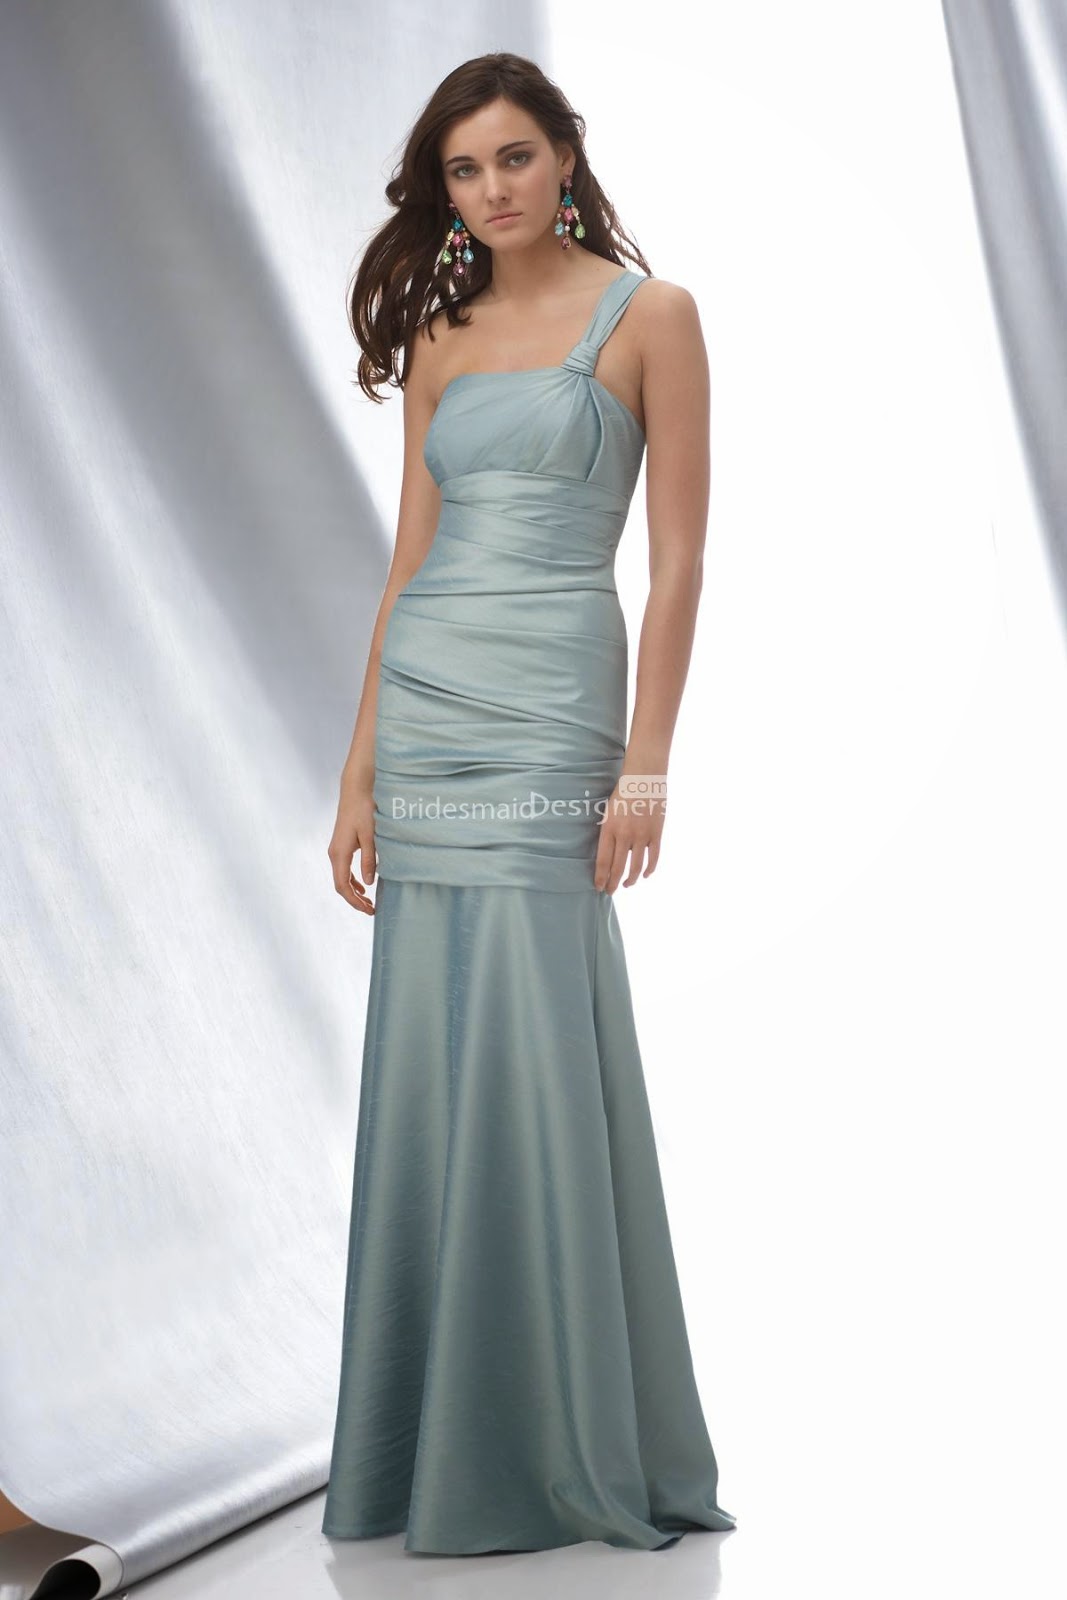 http://www.bridesmaiddesigners.com/best-one-shoulder-fit-and-flare-draped-floor-length-bridesmaid-dress-430.html